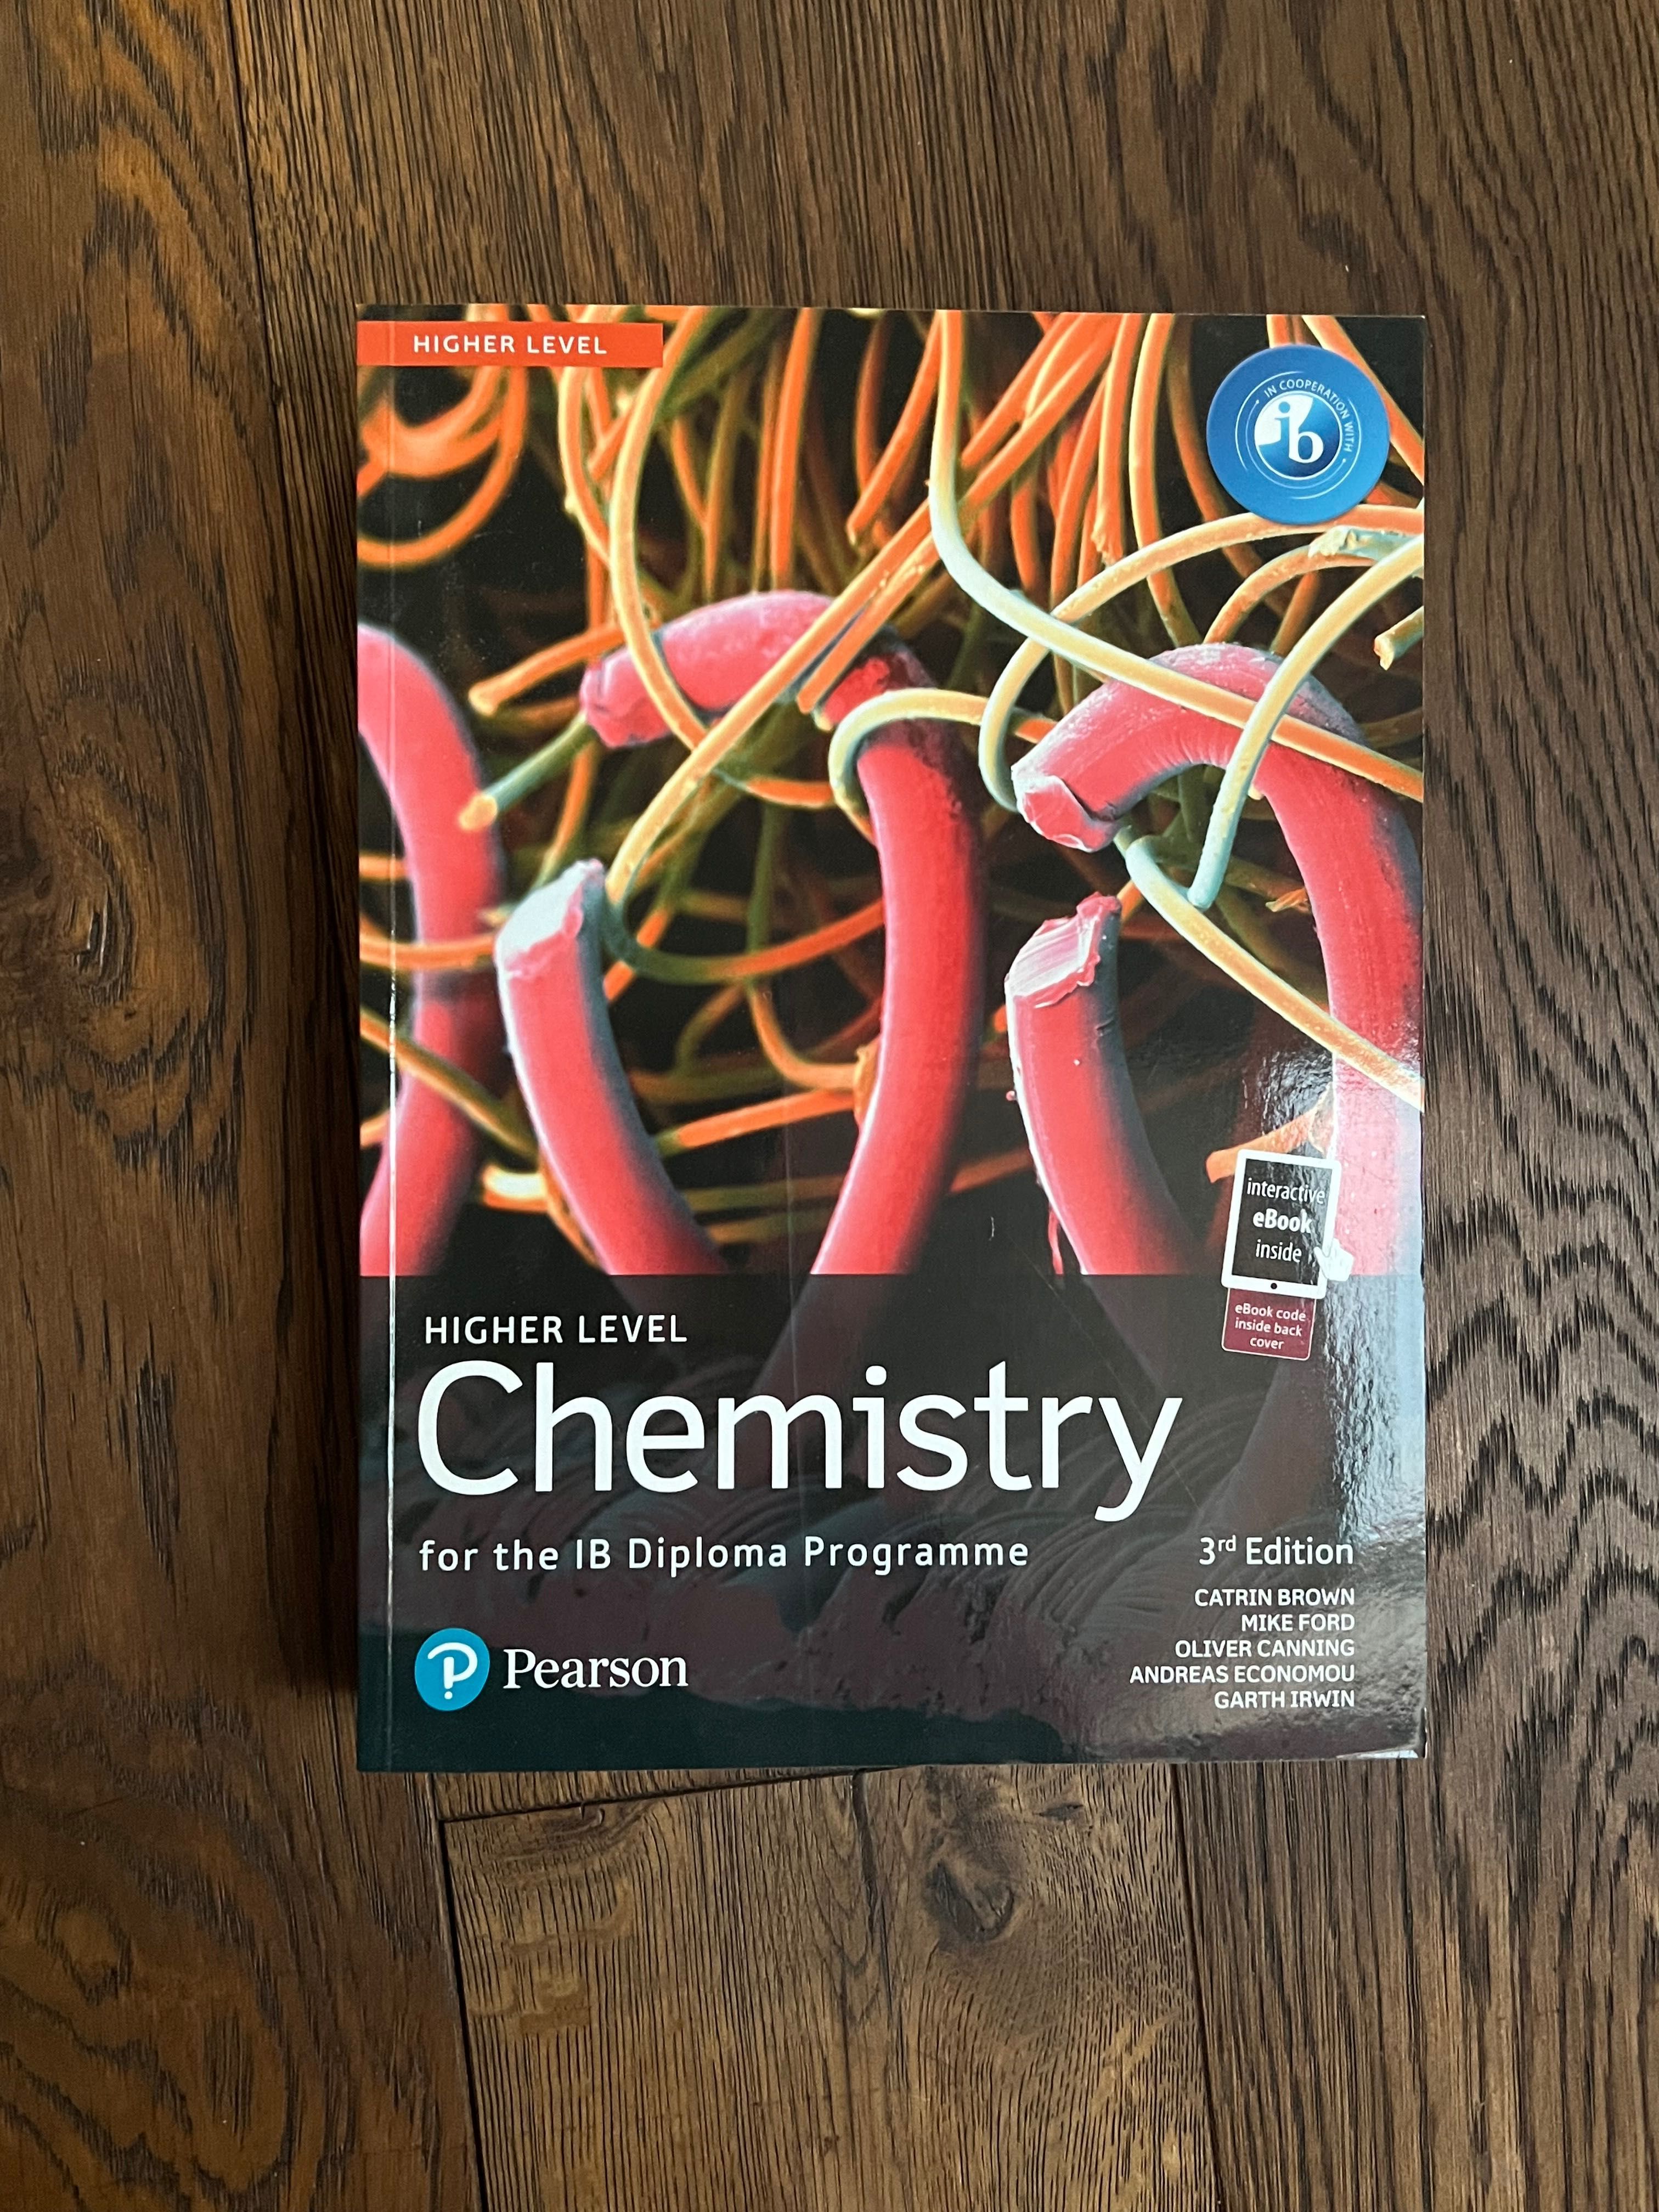 Chemistry for the IB Diploma Programme (HL) (pearson)